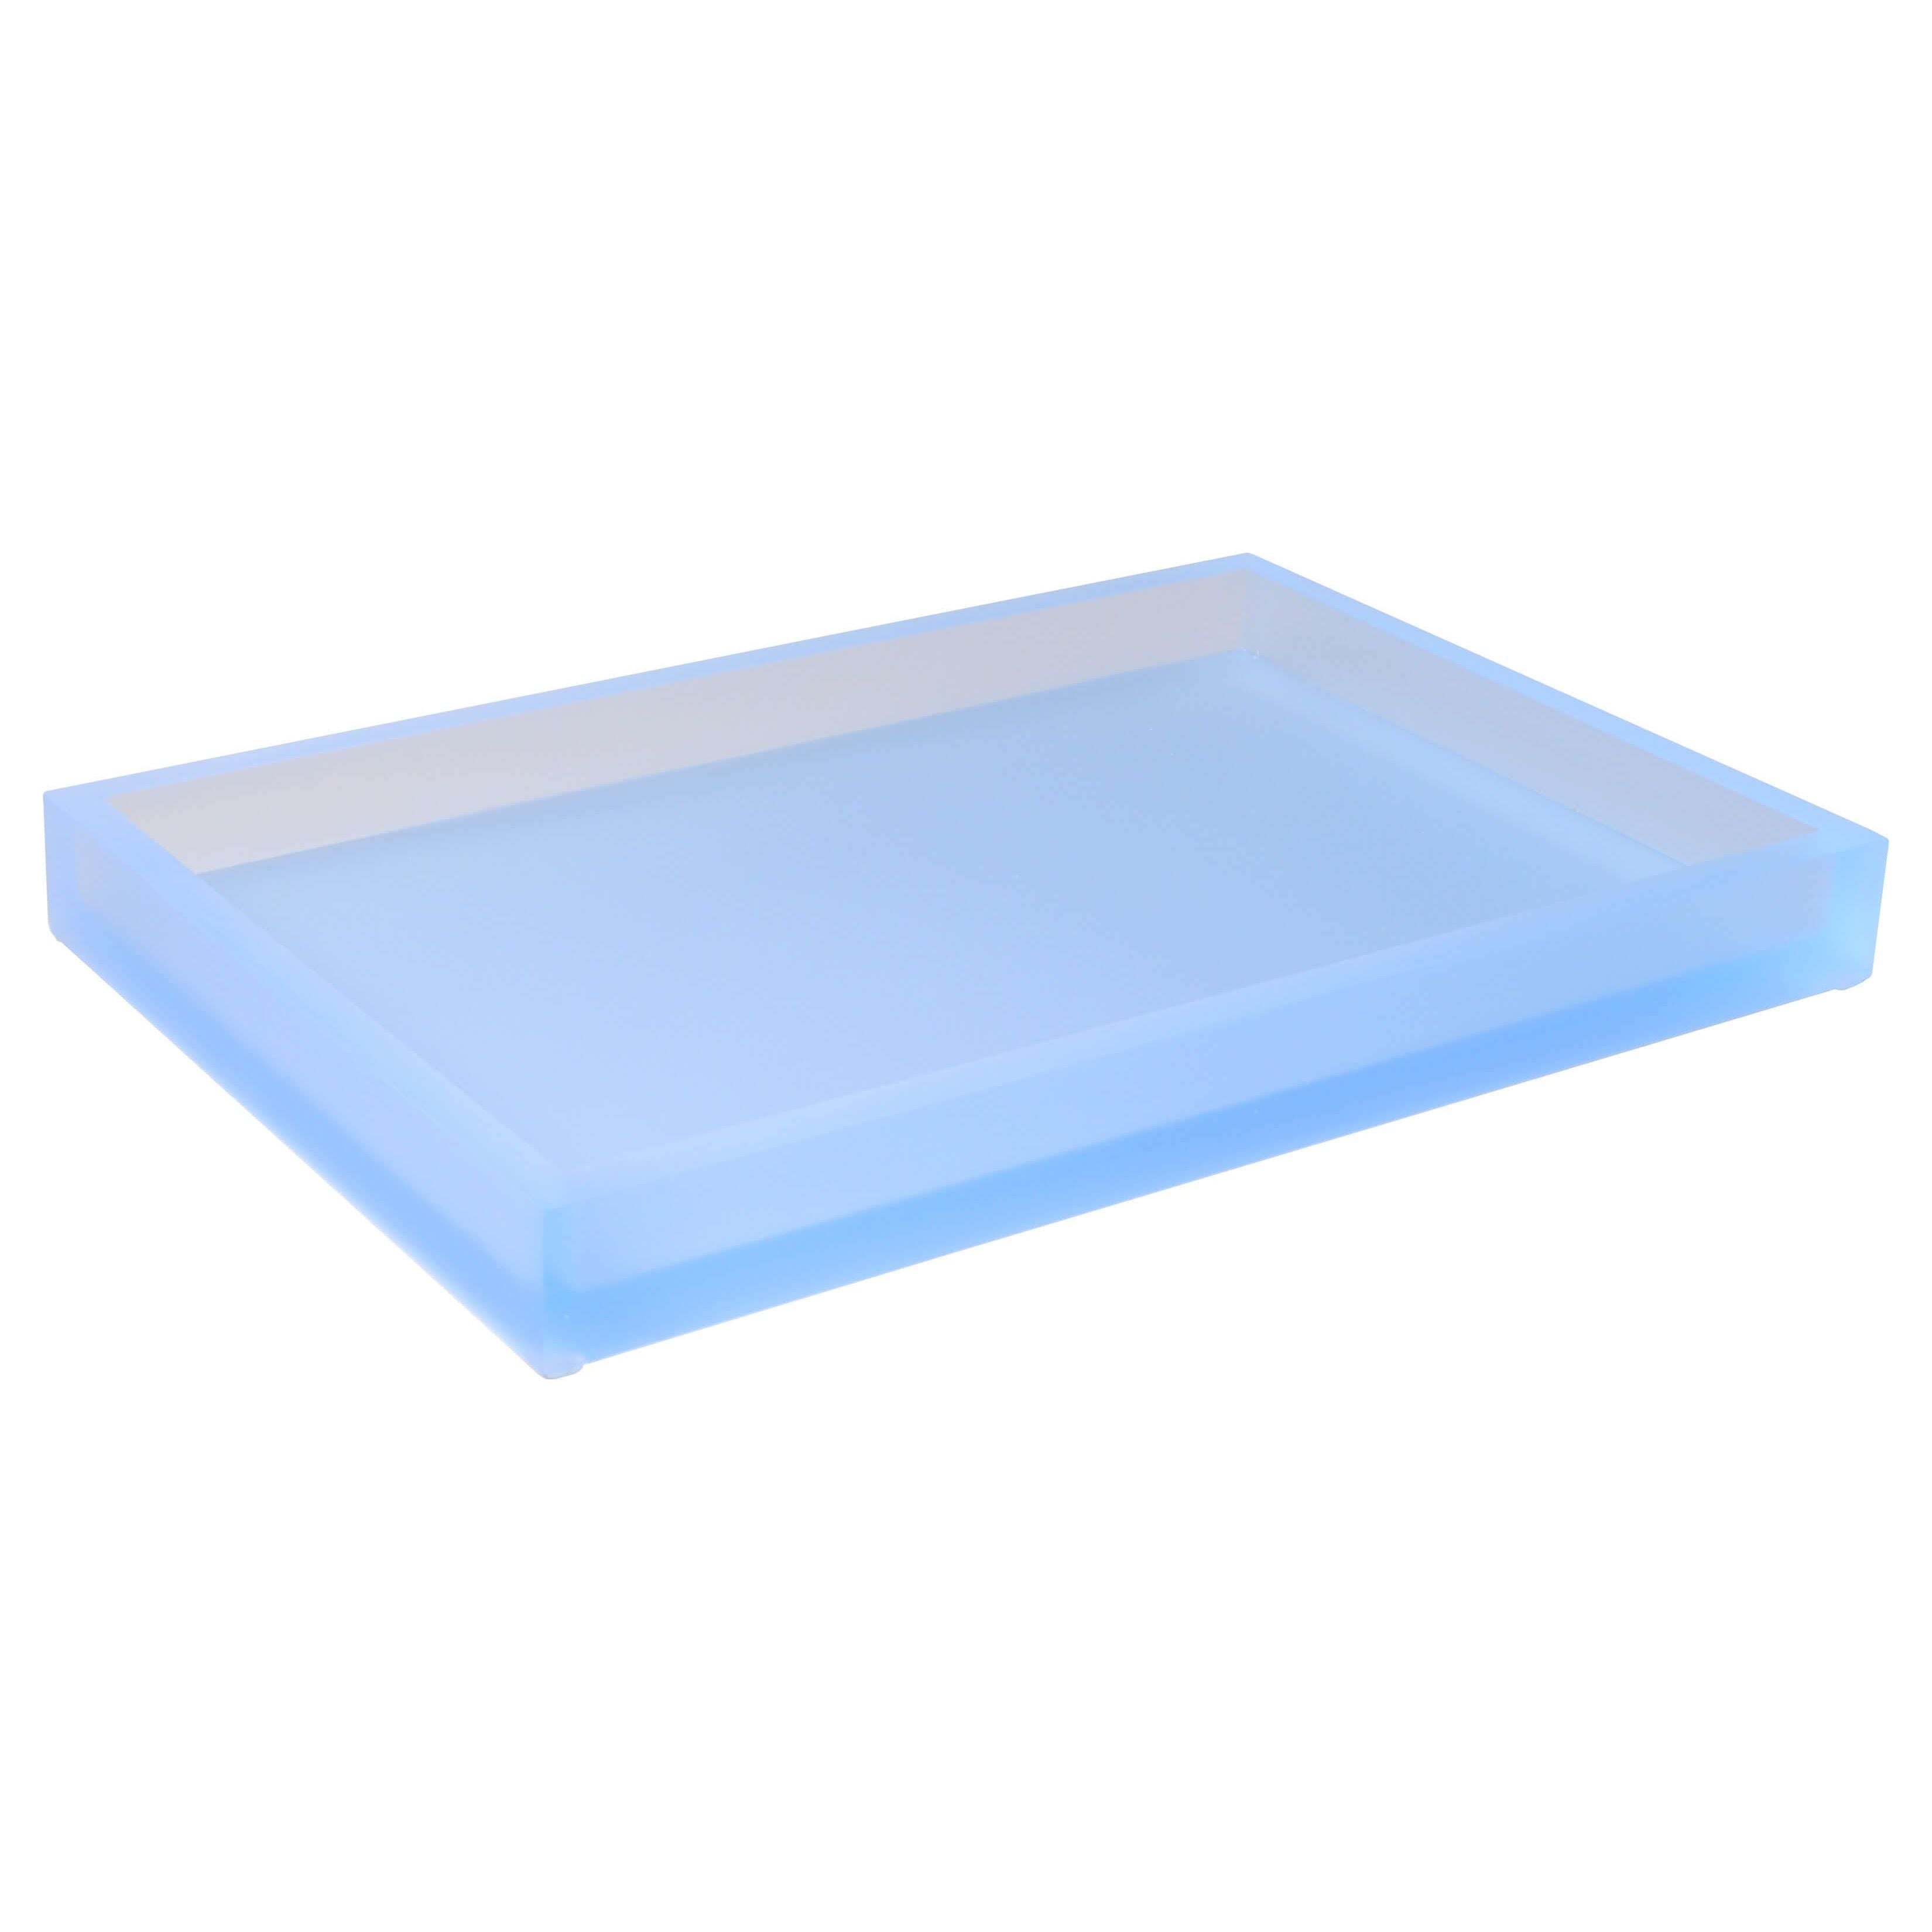 Mike + Ally - Ice Frosted Sky Large Vanity Tray - 31417 - Blue - 